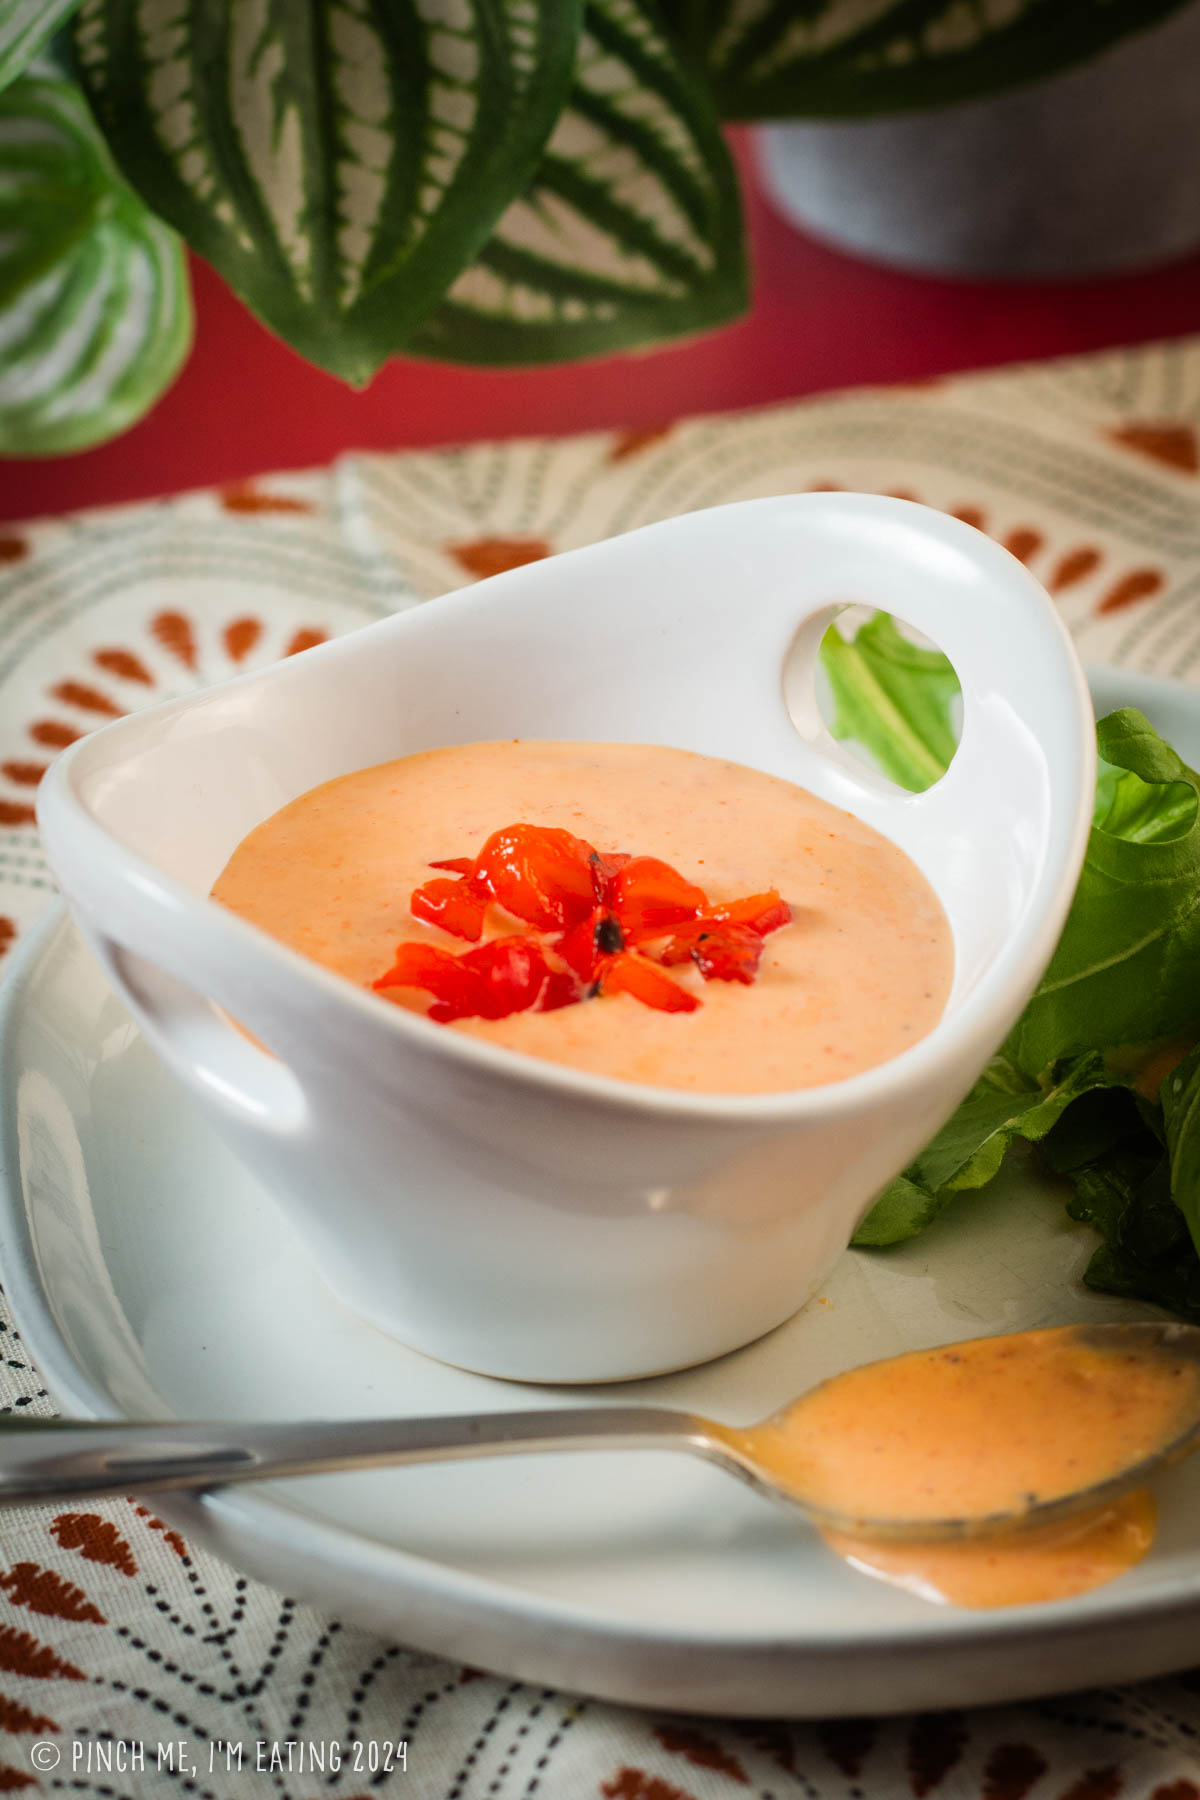 Roasted red pepper aioli in a small white bowl topped with diced roasted bell peppers.